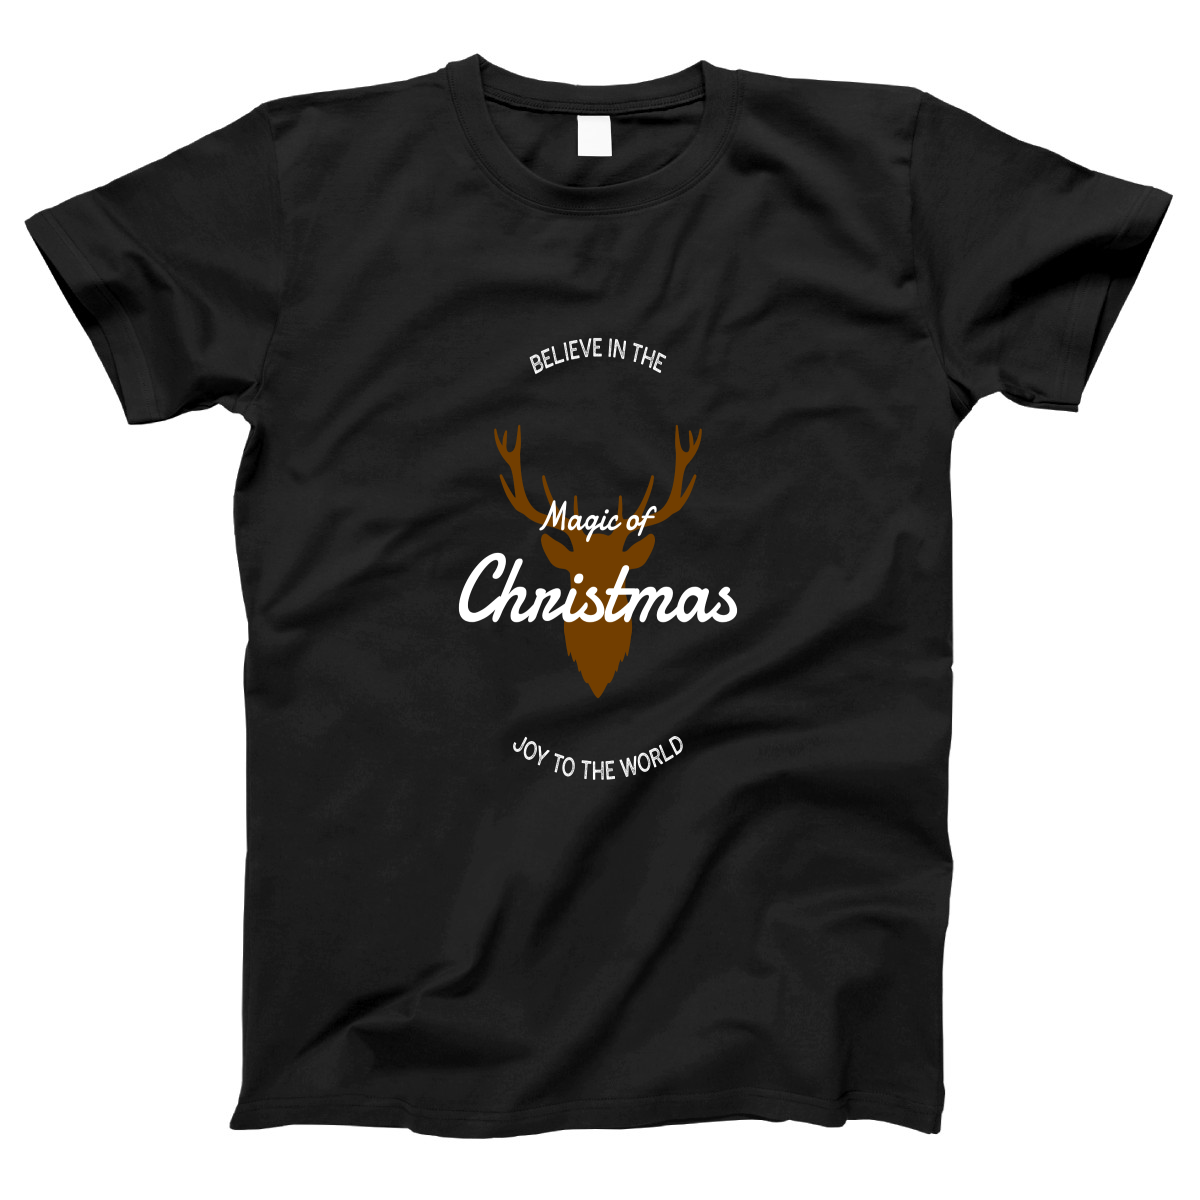 Believe in the Magic of Christmas Joy to the World Women's T-shirt | Black